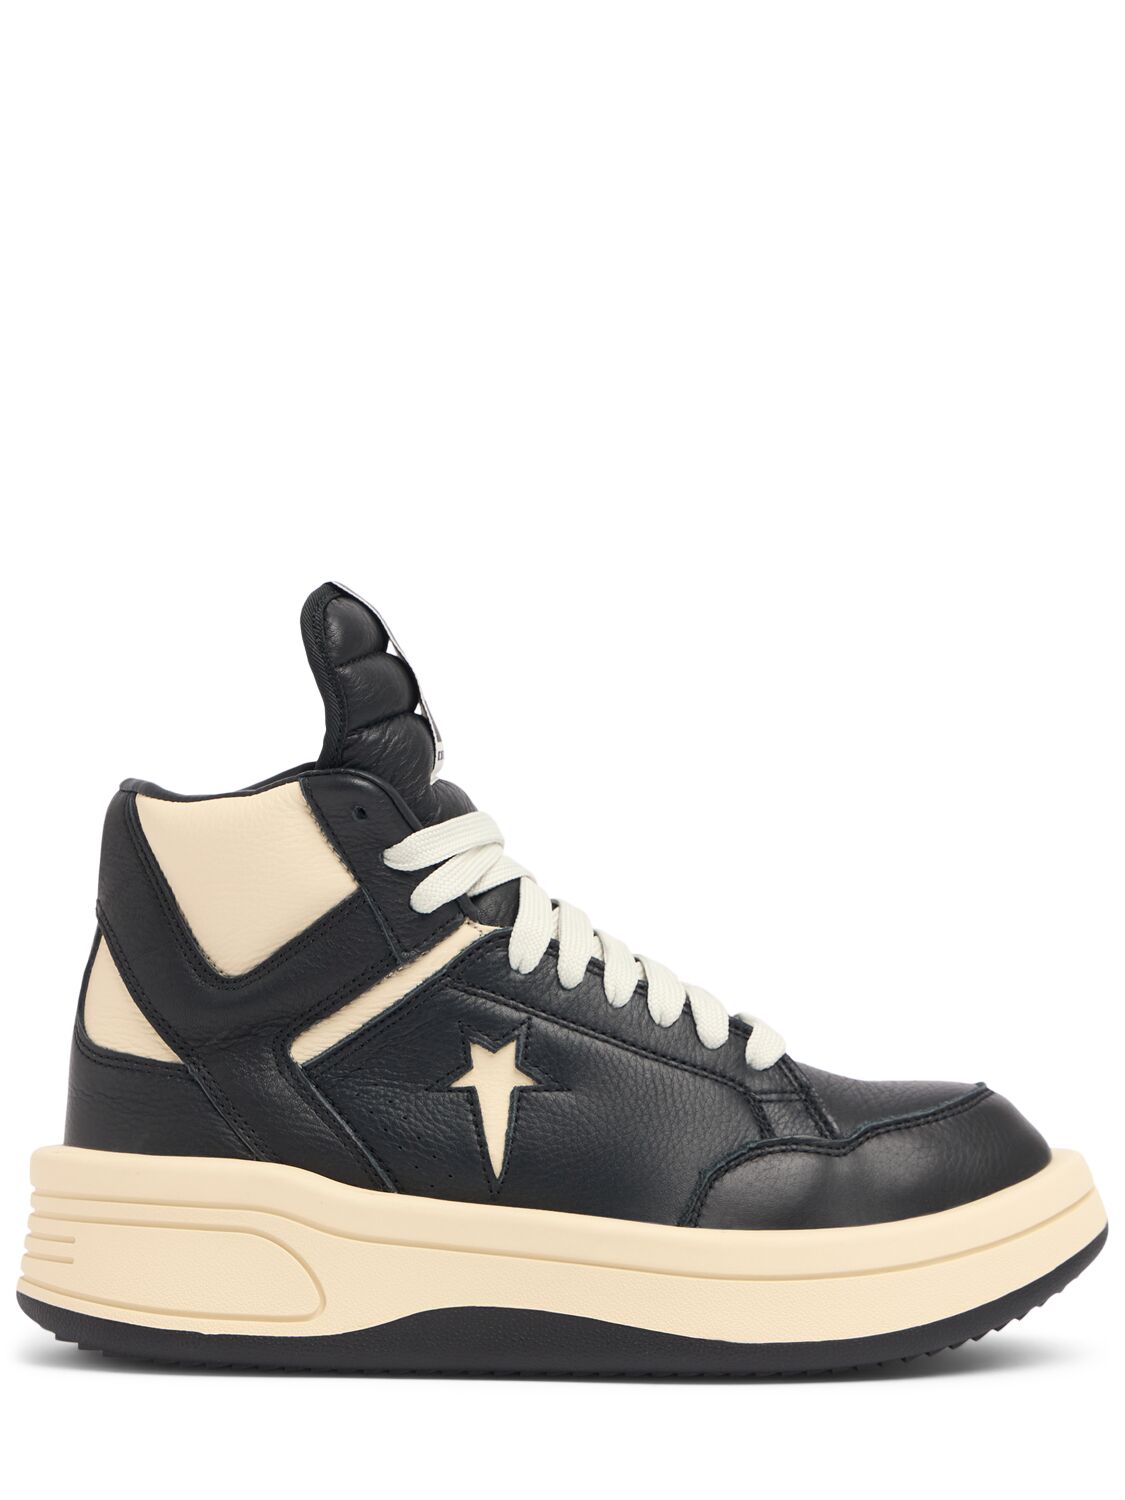 Drkshdw X Converse Turbowpn Leather Sneakers In Black,white